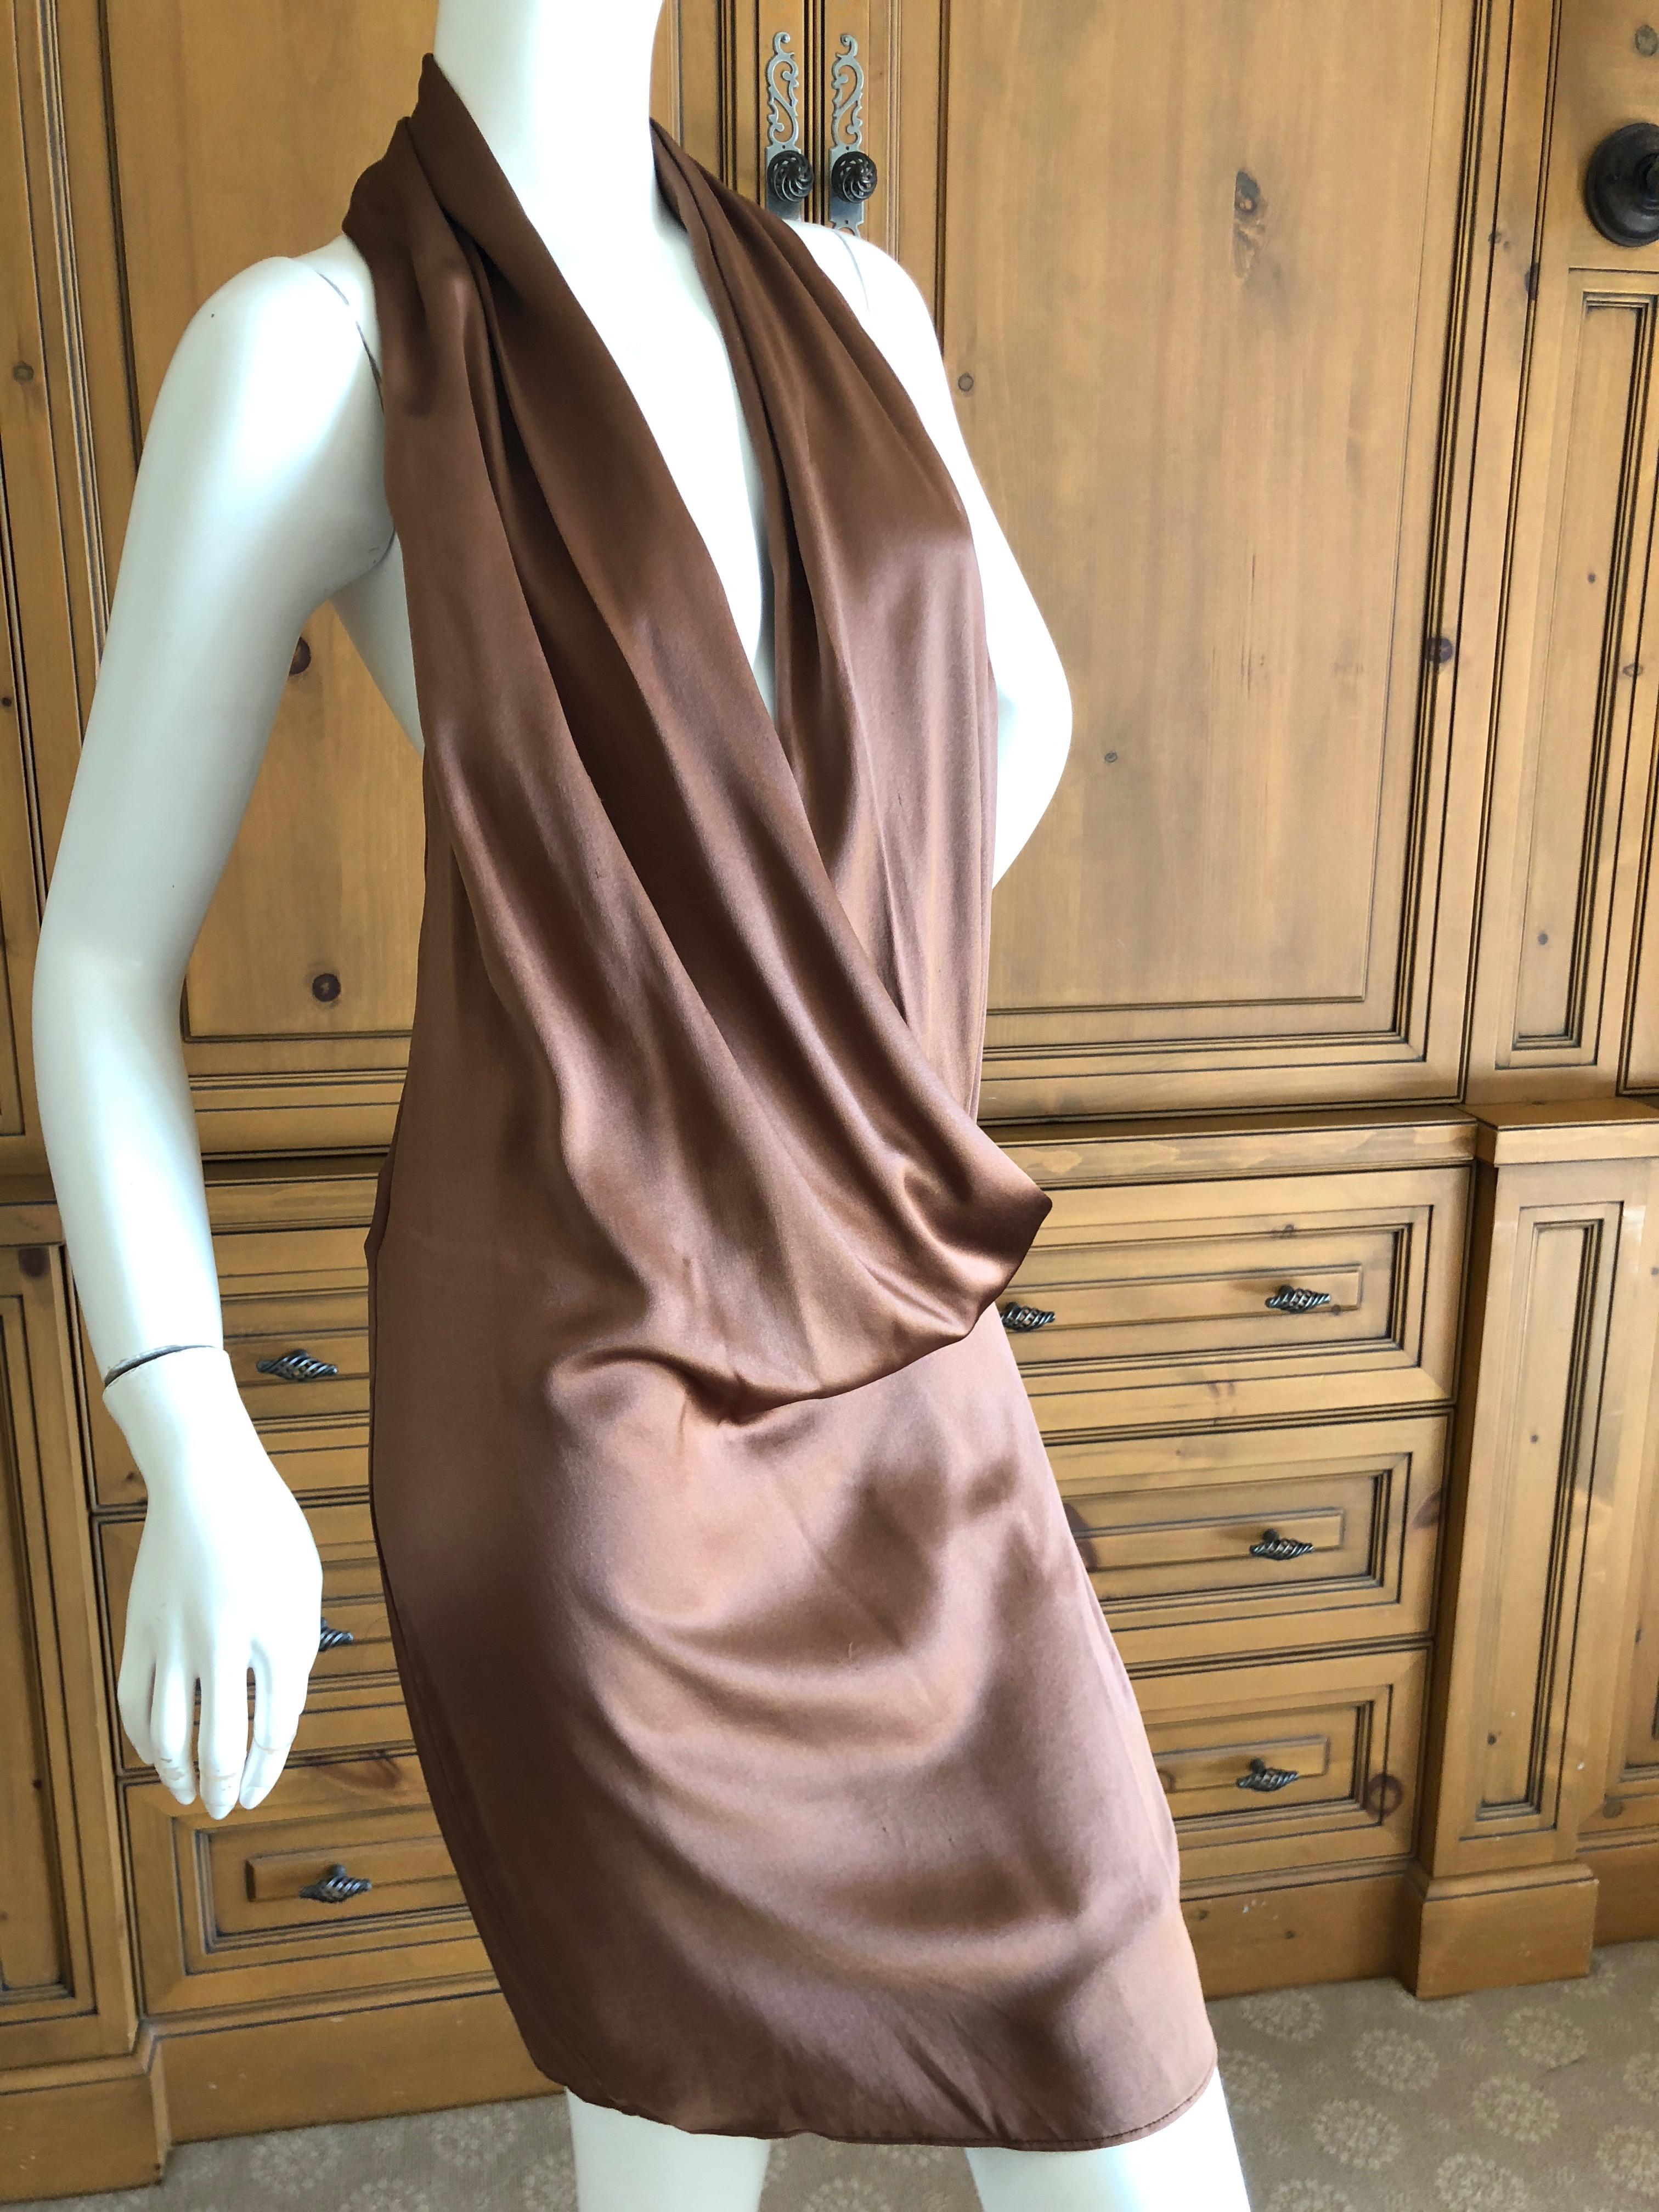 Hermes by Martin Margiela Duchesse Satin Low Cut Wrap Dress New with Tags.
This is so pretty, pure luxe.
Size 36
Bust 36